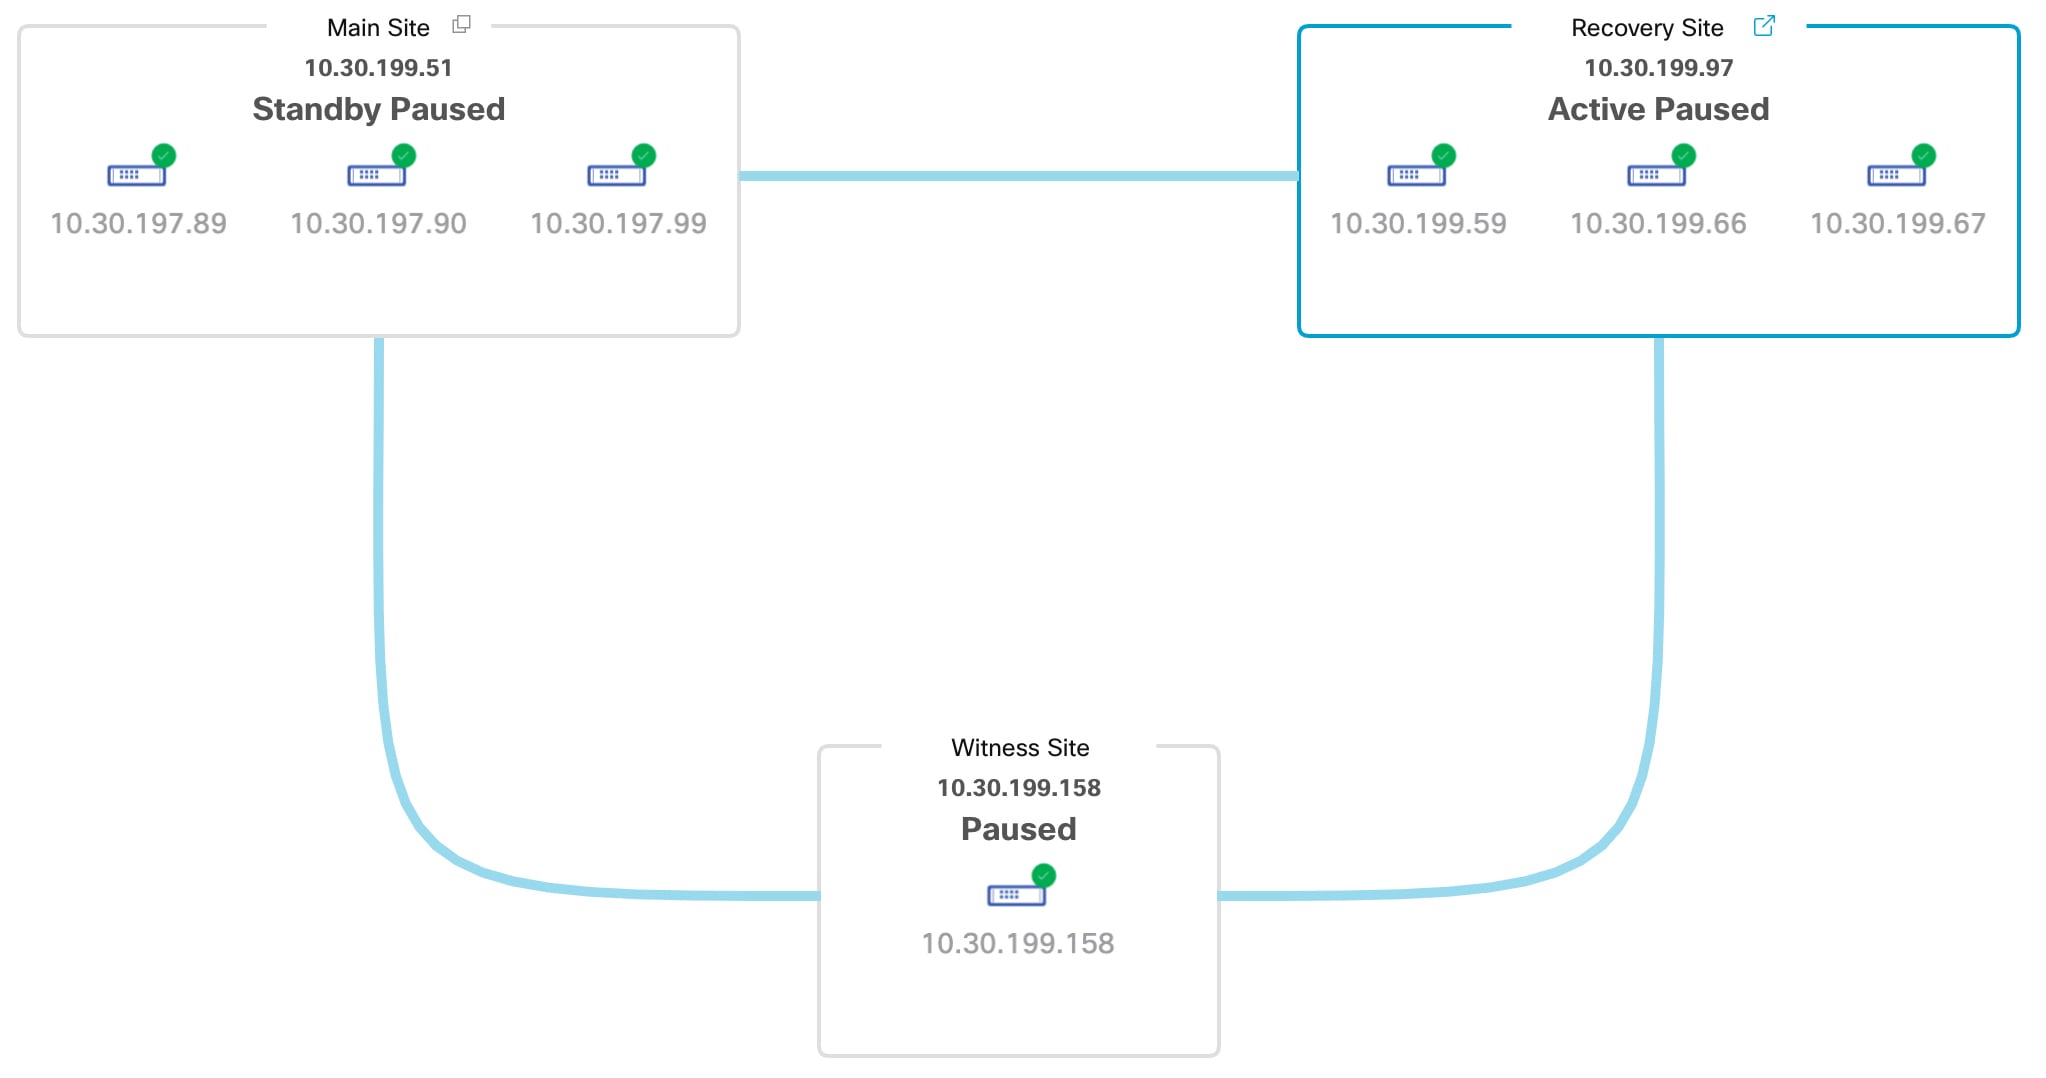 The Monitoring tab of the Cisco DNA Center Disaster Recovery window displays the system topology. The main and recovery sites are in Paused state.